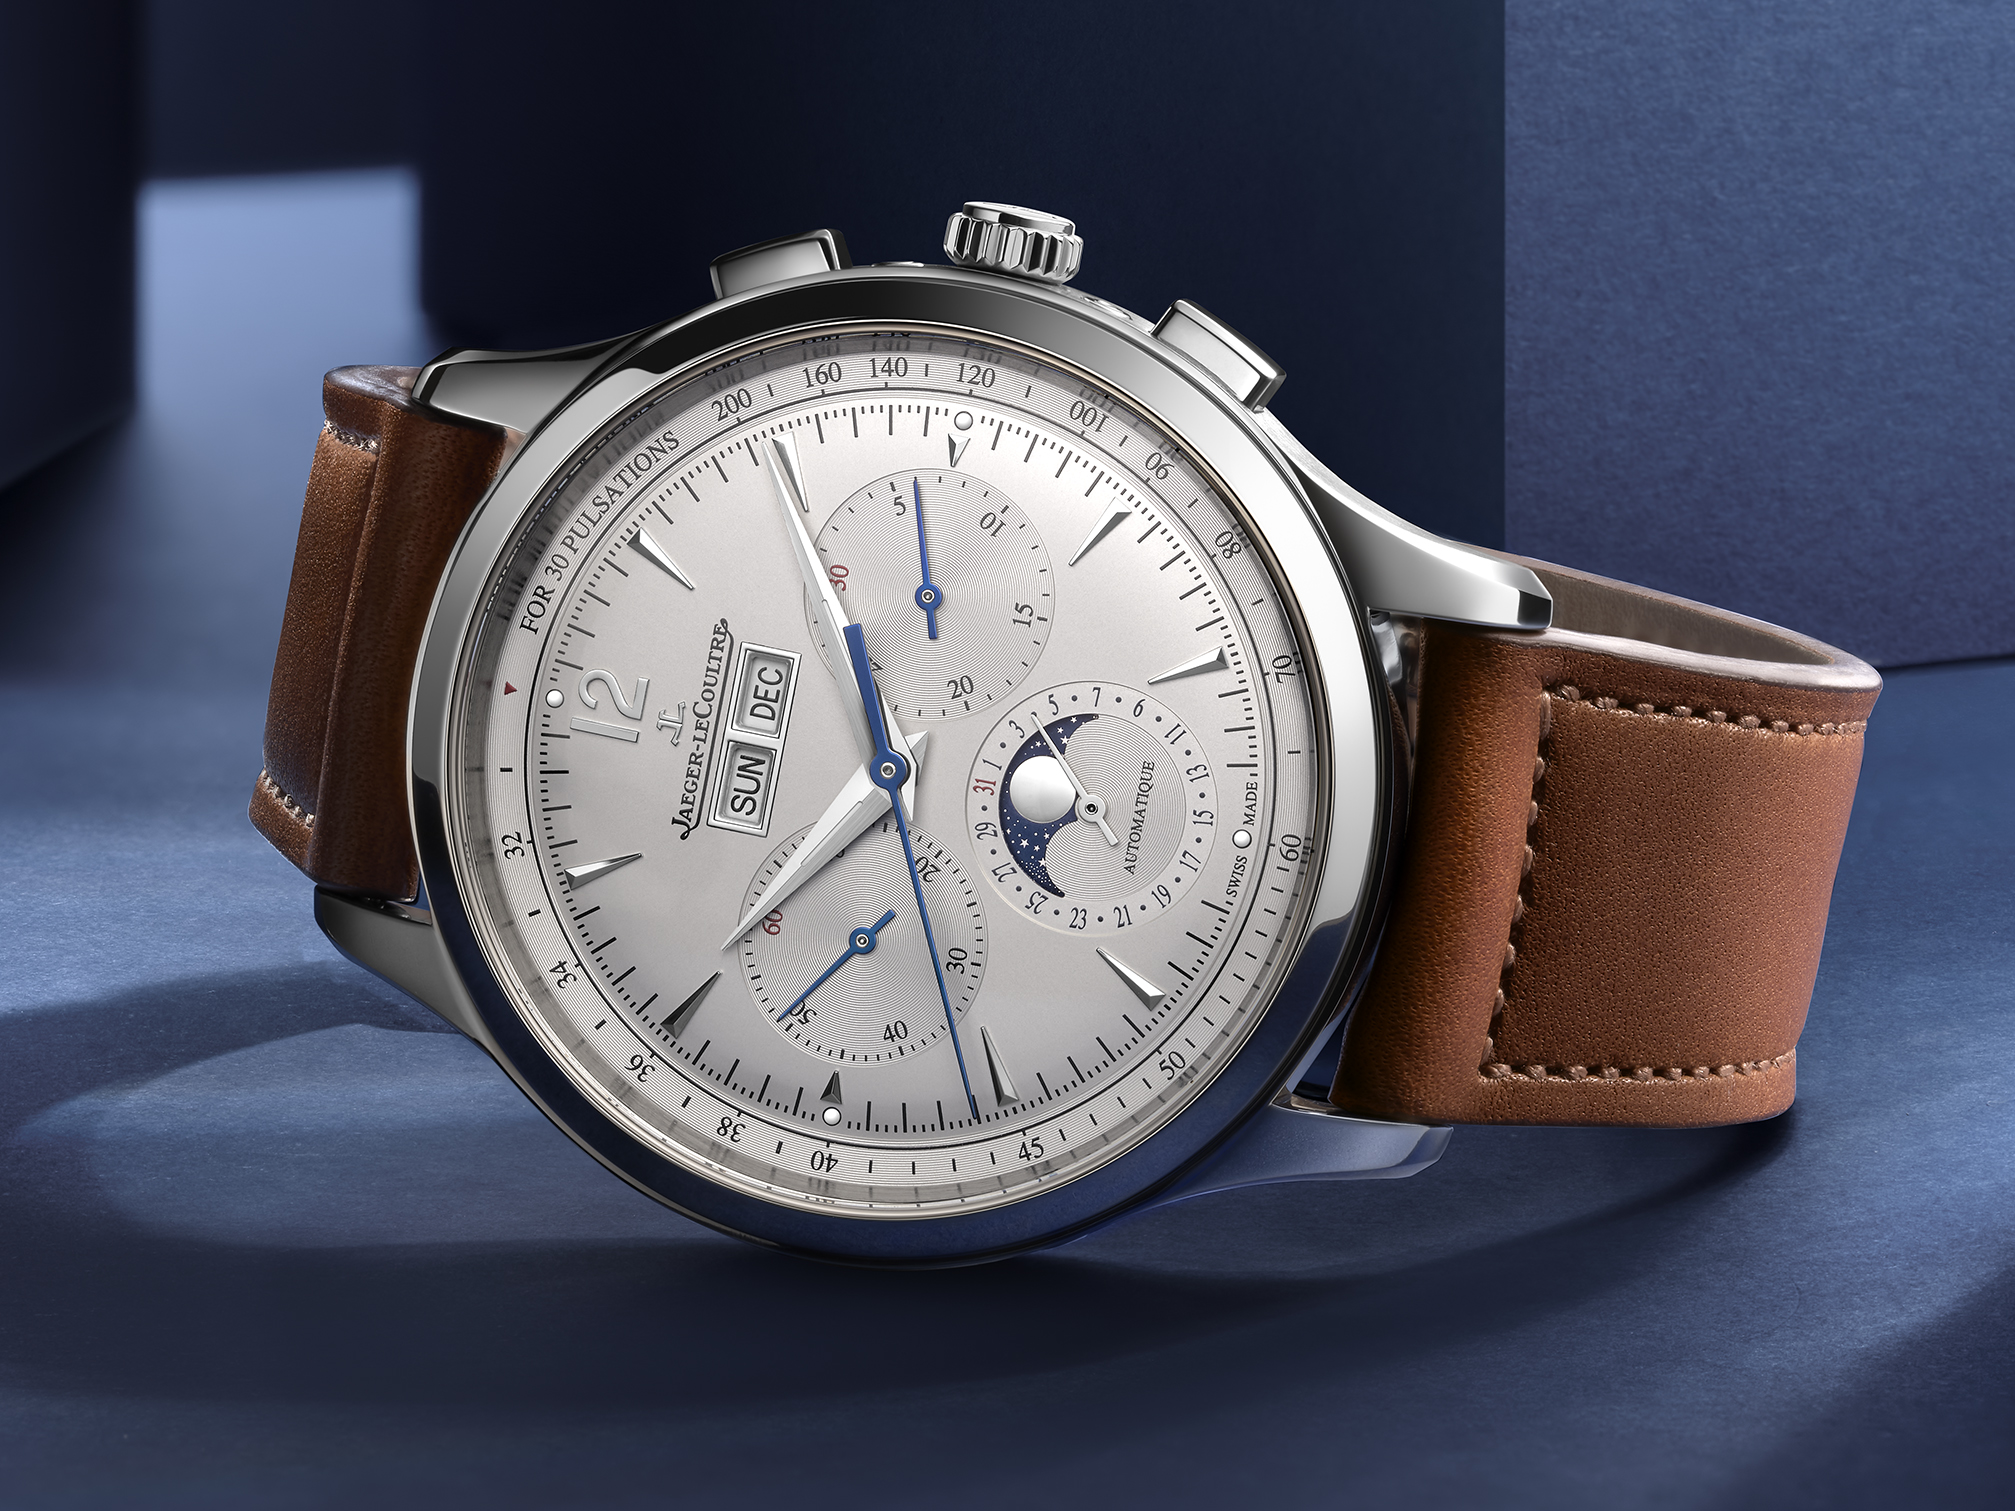 Jaeger-LeCoultre and New Models for its Master Control Collection